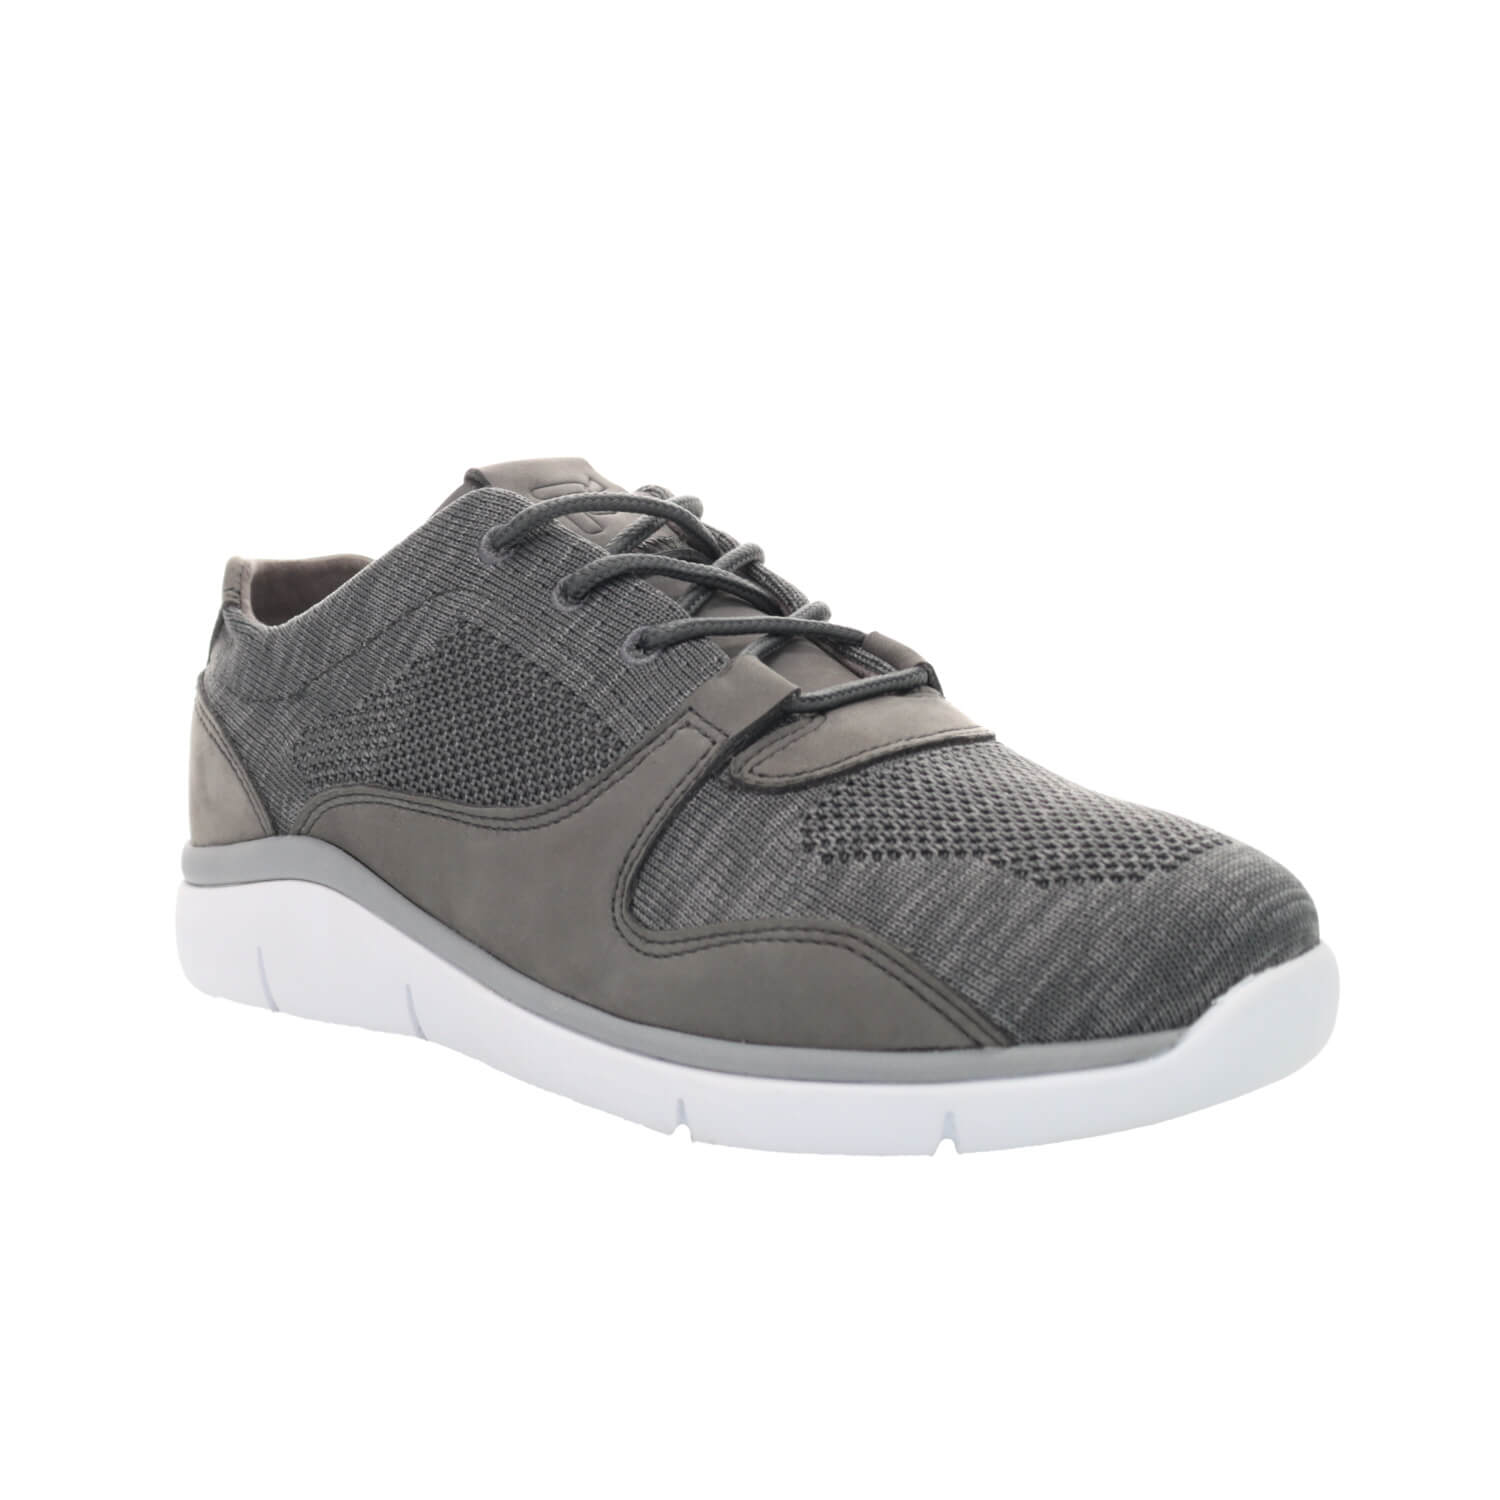 Prop?t Sarah - Women's Breathable Motion Control Sneakers